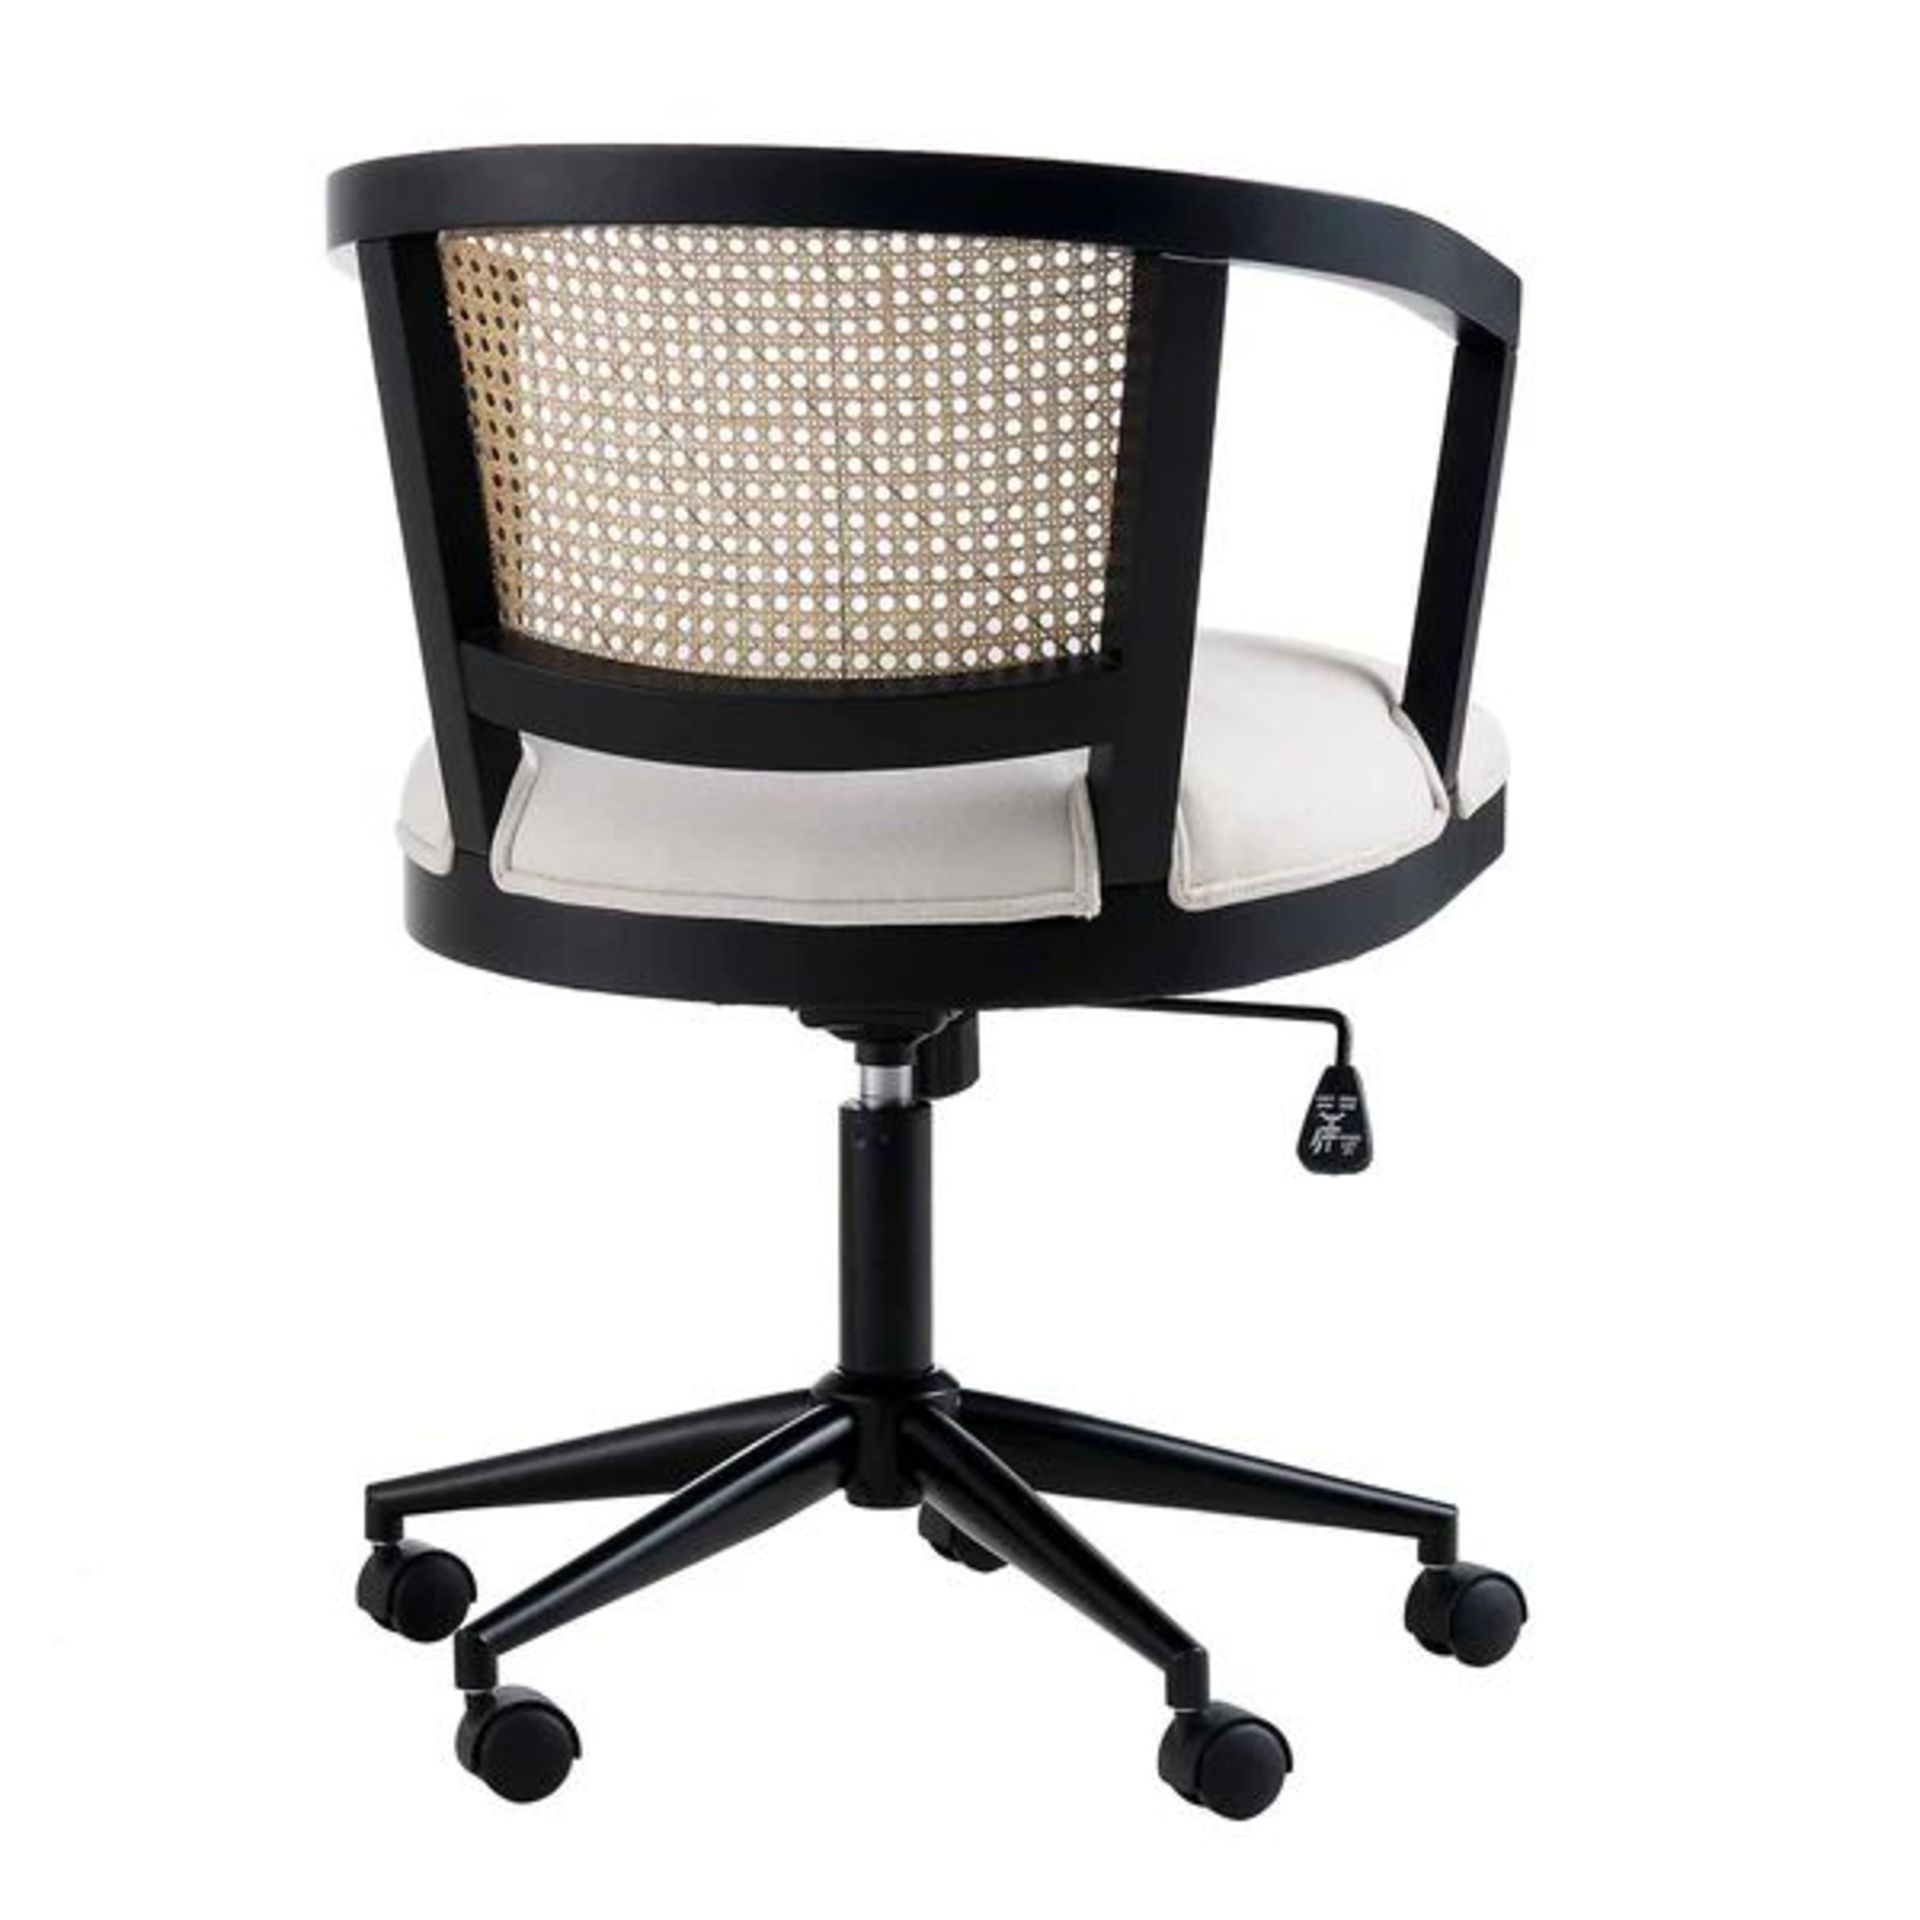 Lucia Natural Cane Swivel Desk Chair. - SR24. The chair features a beautiful clam shell design - Image 2 of 2